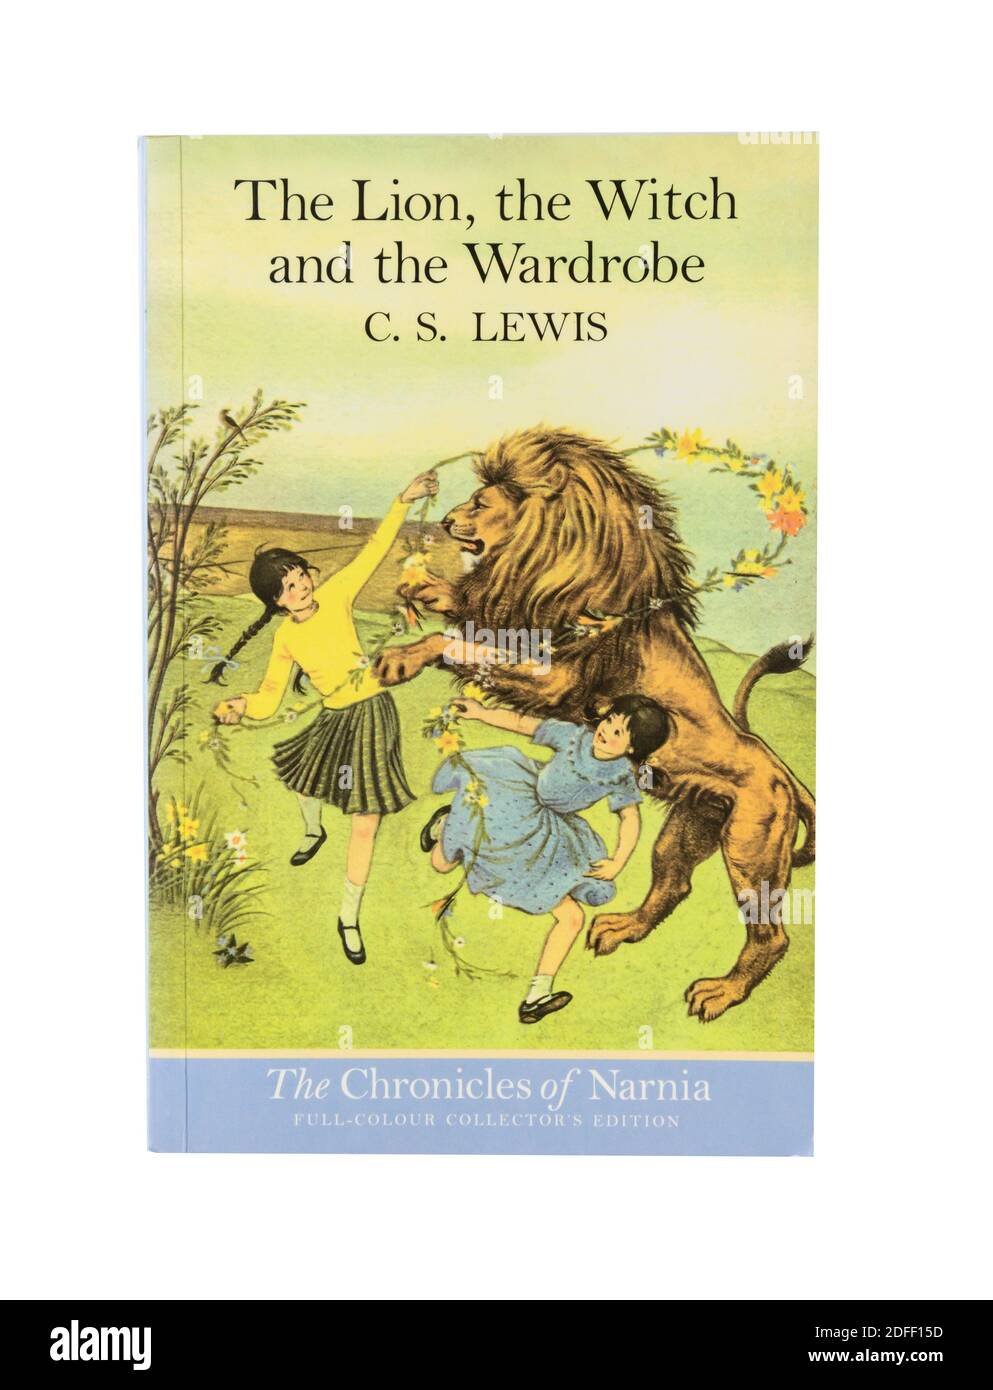 The Lion, the Witch and the Wardrobe children's book by C.S.Lewis, Greater London, England, United Kingdom Stock Photo